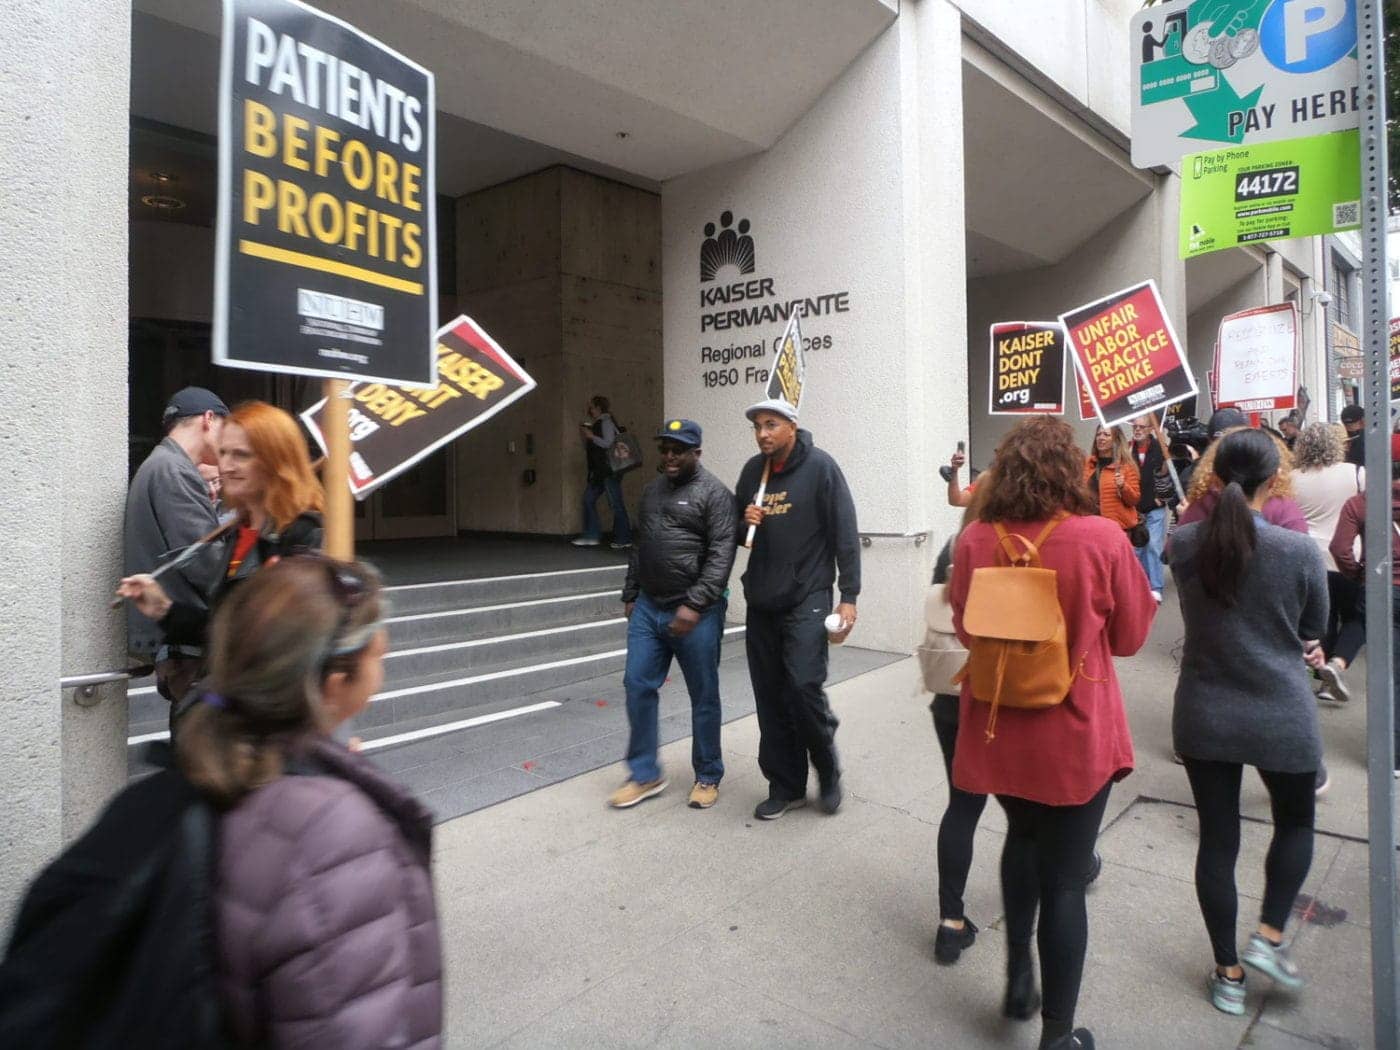 Mental-Health-Specialists-strike-at-Kaiser-Permanente-by-Jahahara-1022-1400x1050, Mobilize our critical votes by 8 November! , Culture Currents Local News & Views News & Views 